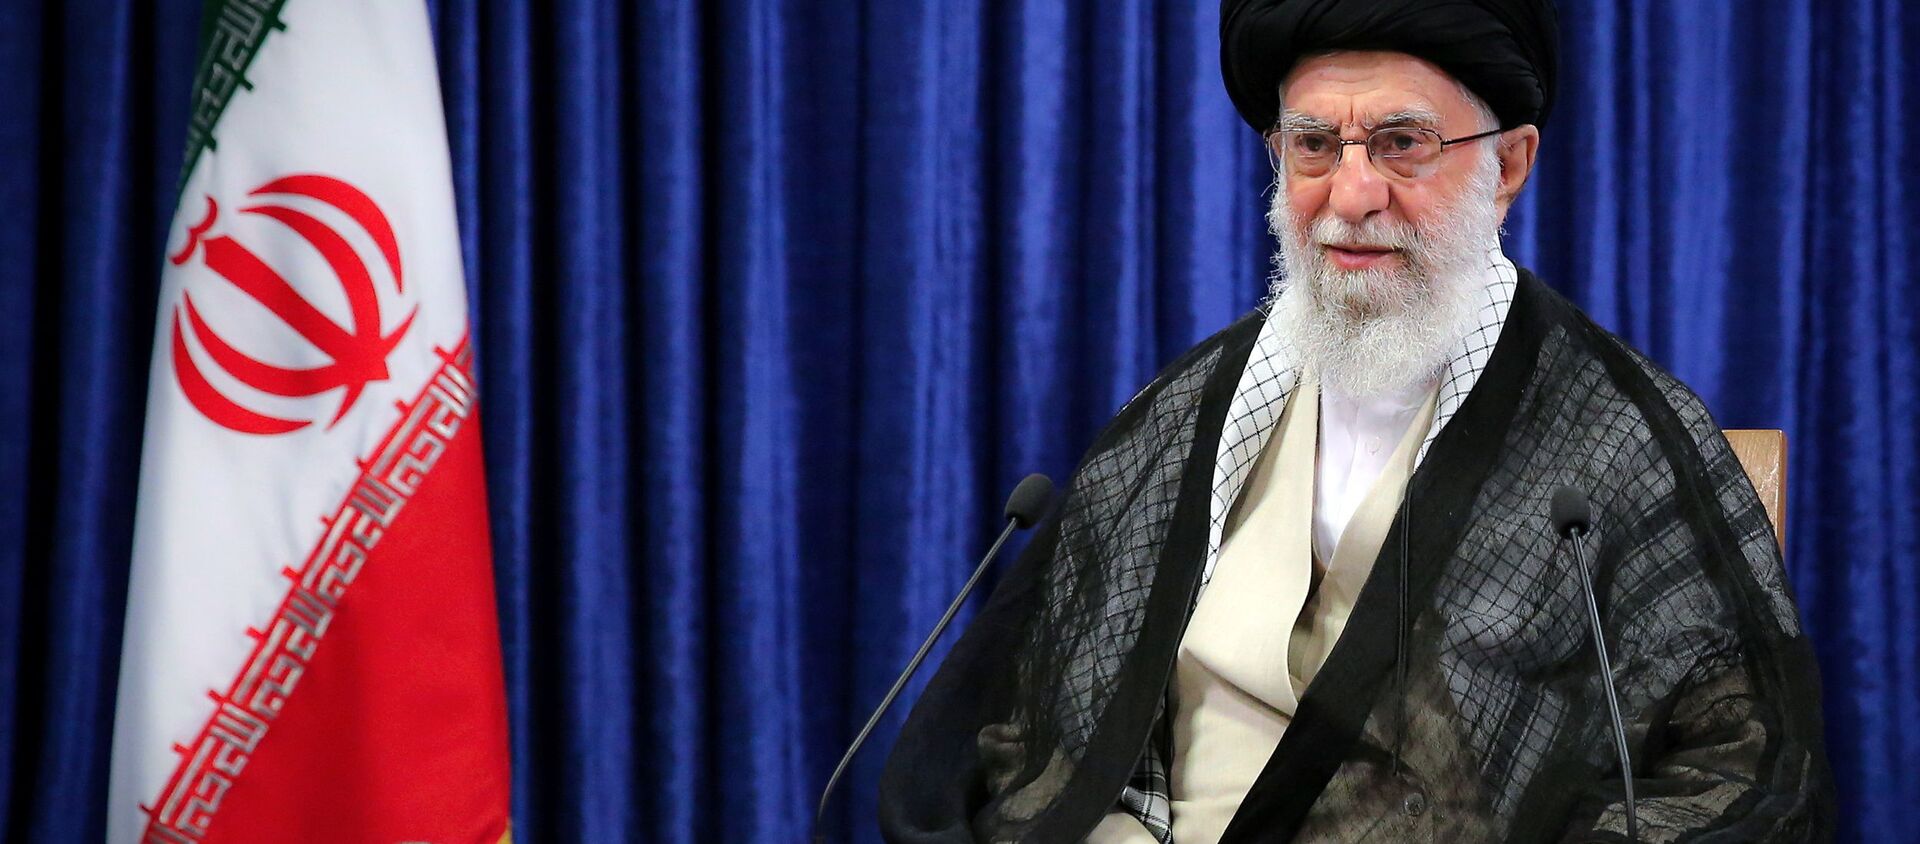 Iran's Supreme Leader Ayatollah Ali Khamenei delivers a live televised speech marking the annual Quds Day, or Jerusalem Day, on the last Friday of the Muslim holy month of Ramadan, in Tehran, Iran May 7, 2021 - Sputnik International, 1920, 11.05.2021